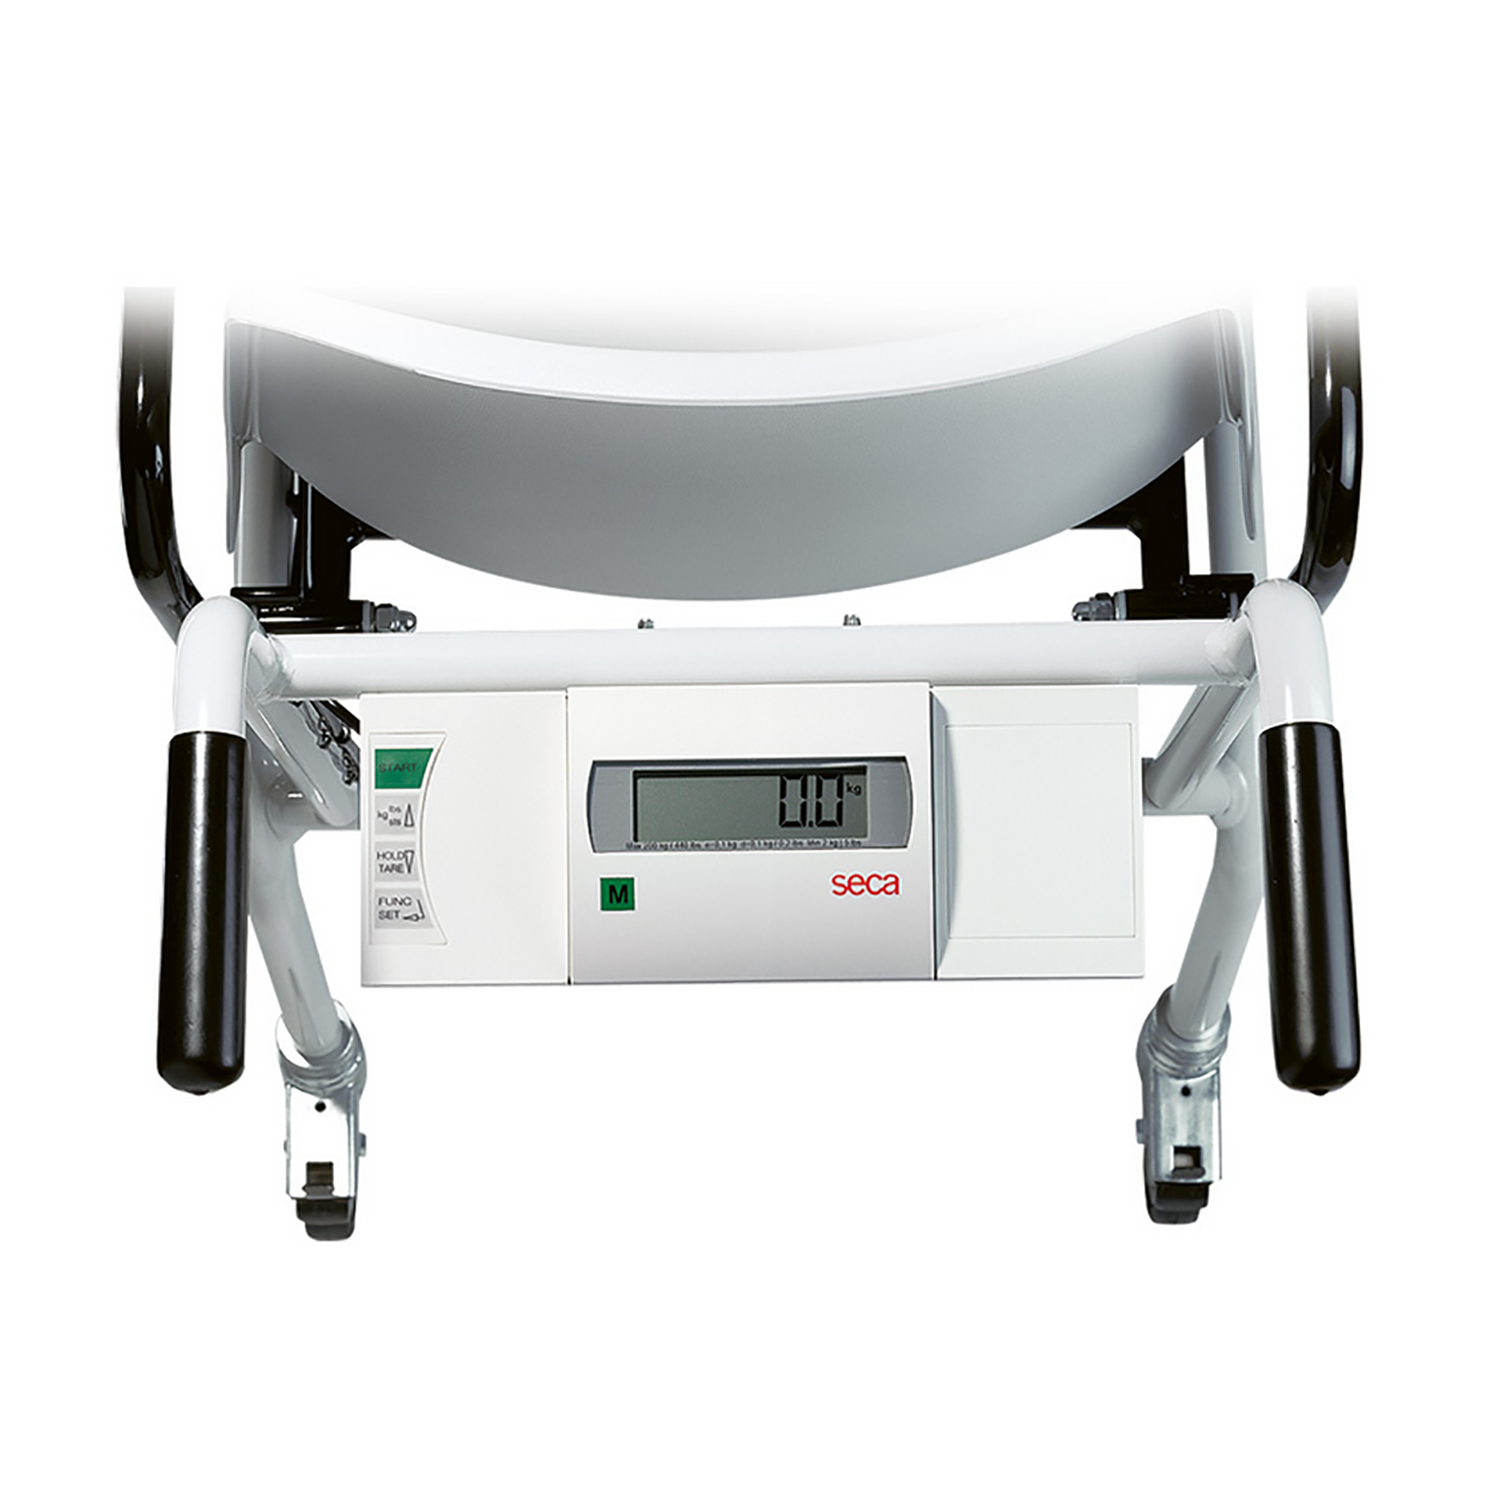 seca 959r Class III Digital High Capacity Chair Scale with fold up arm & footrests, BMI. RS232 interface (2)